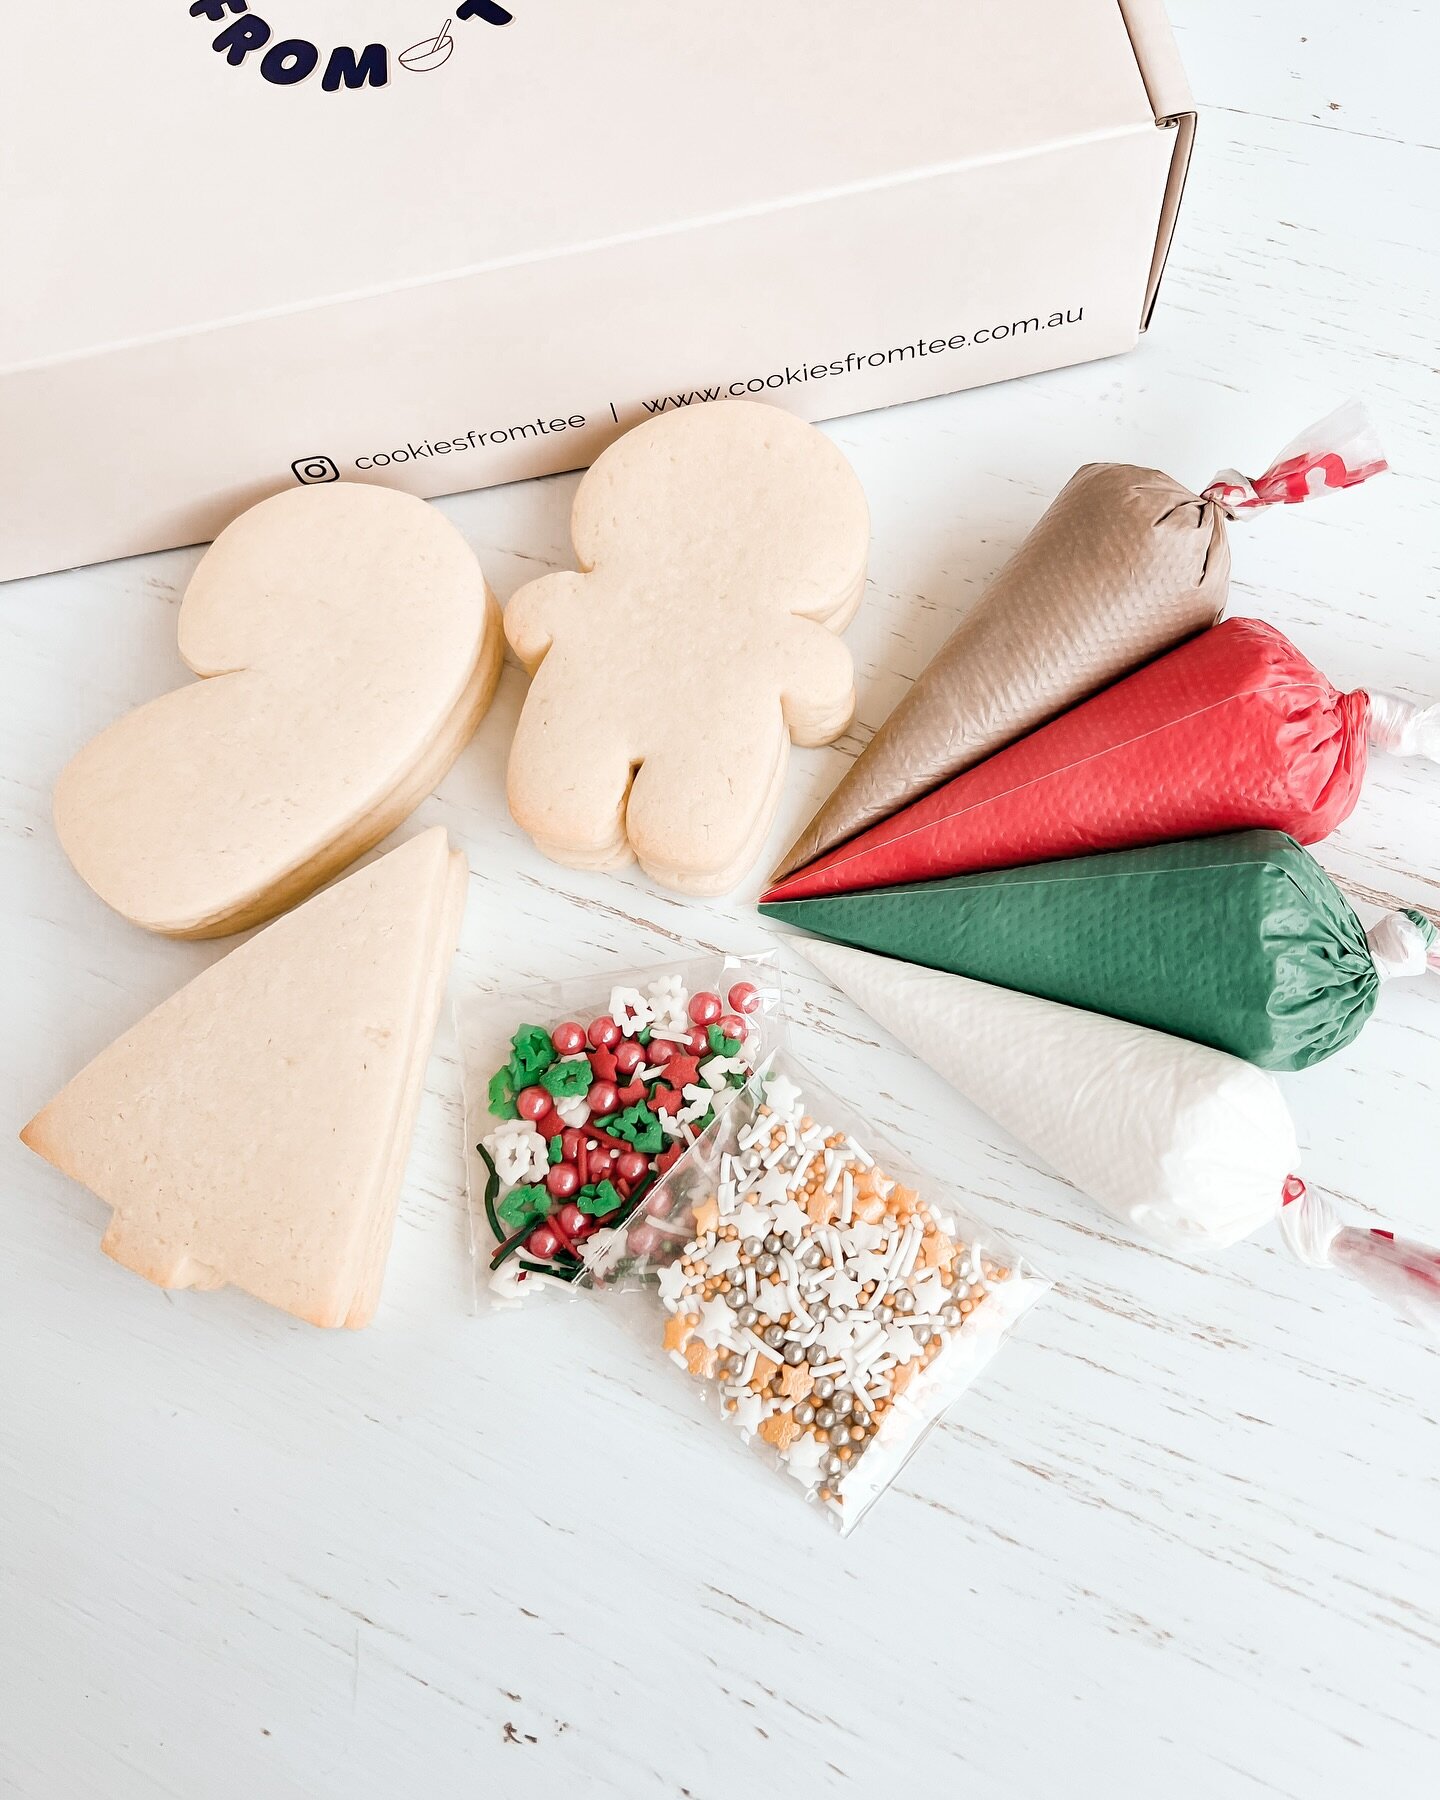 Our Christmas collection is now live on our website (cookiesfromtee.com.au or link in bio) for pre-orders 🎅🏻🎄

________________________

#christmas #christmascookies #christmaspresent #xmascookies #xmaspresent #xmas #gift #vanillasugarcookies #sug